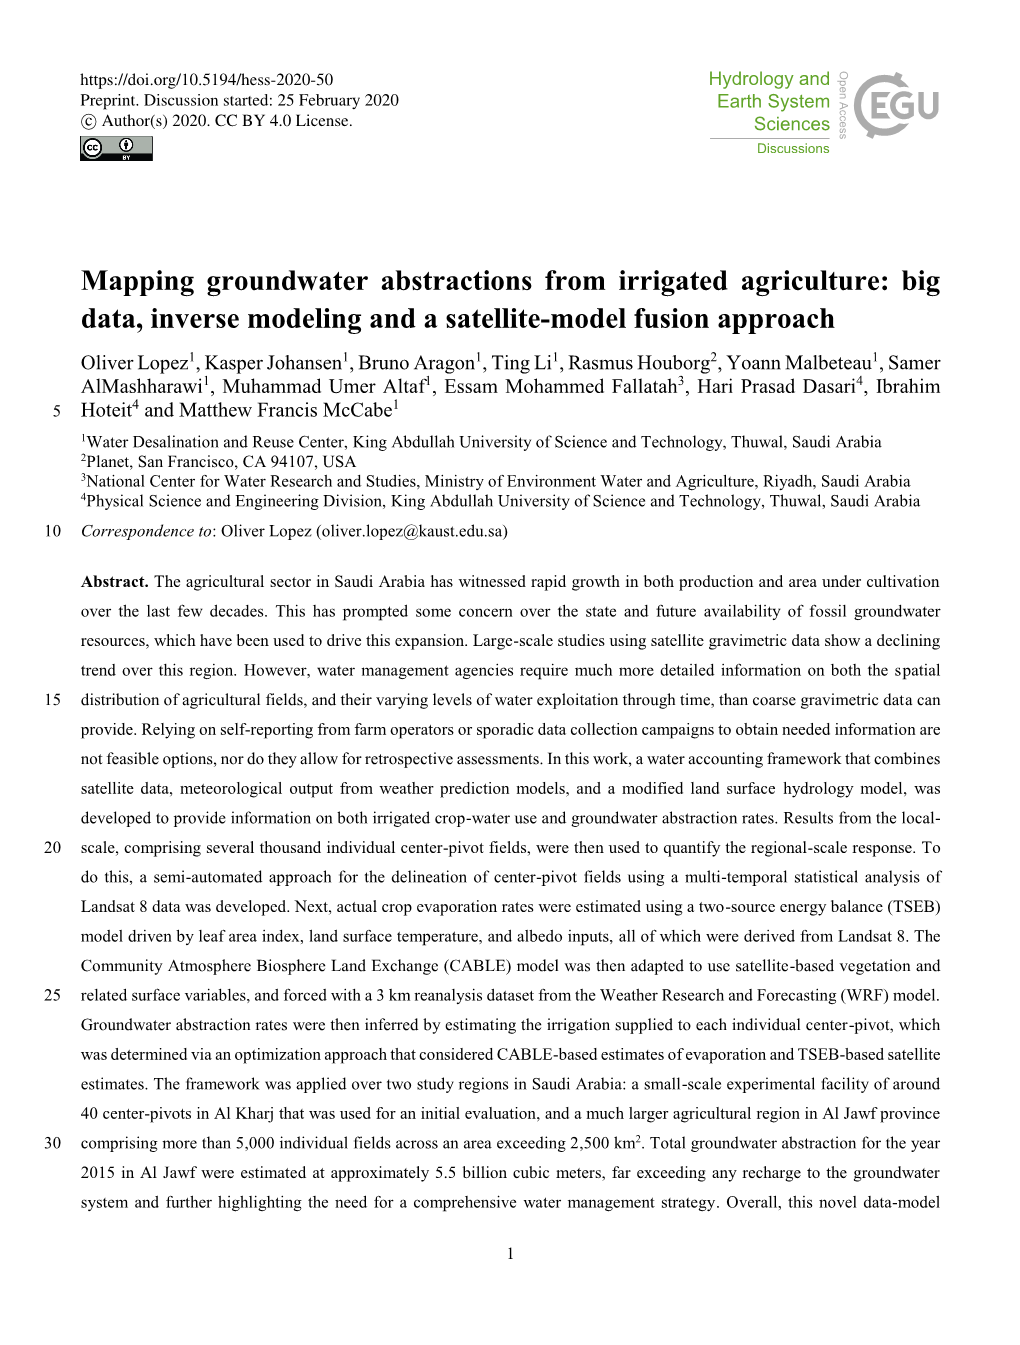 Mapping Groundwater Abstractions from Irrigated Agriculture